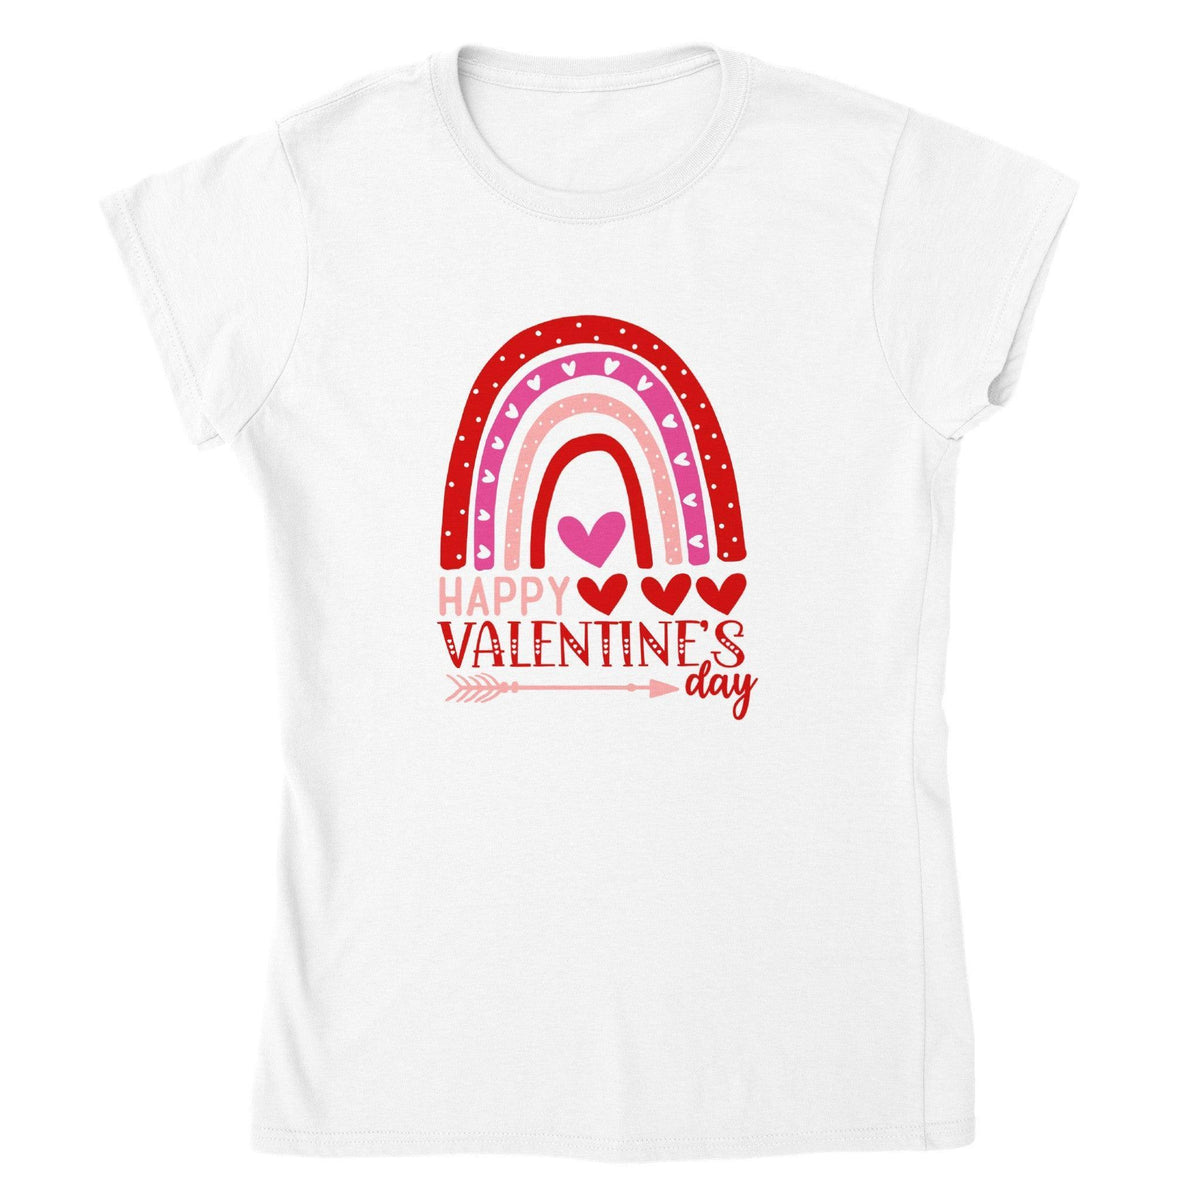 HAPPY VALENTINES DAY T-shirt-Regular Fit Tee-StylinArts